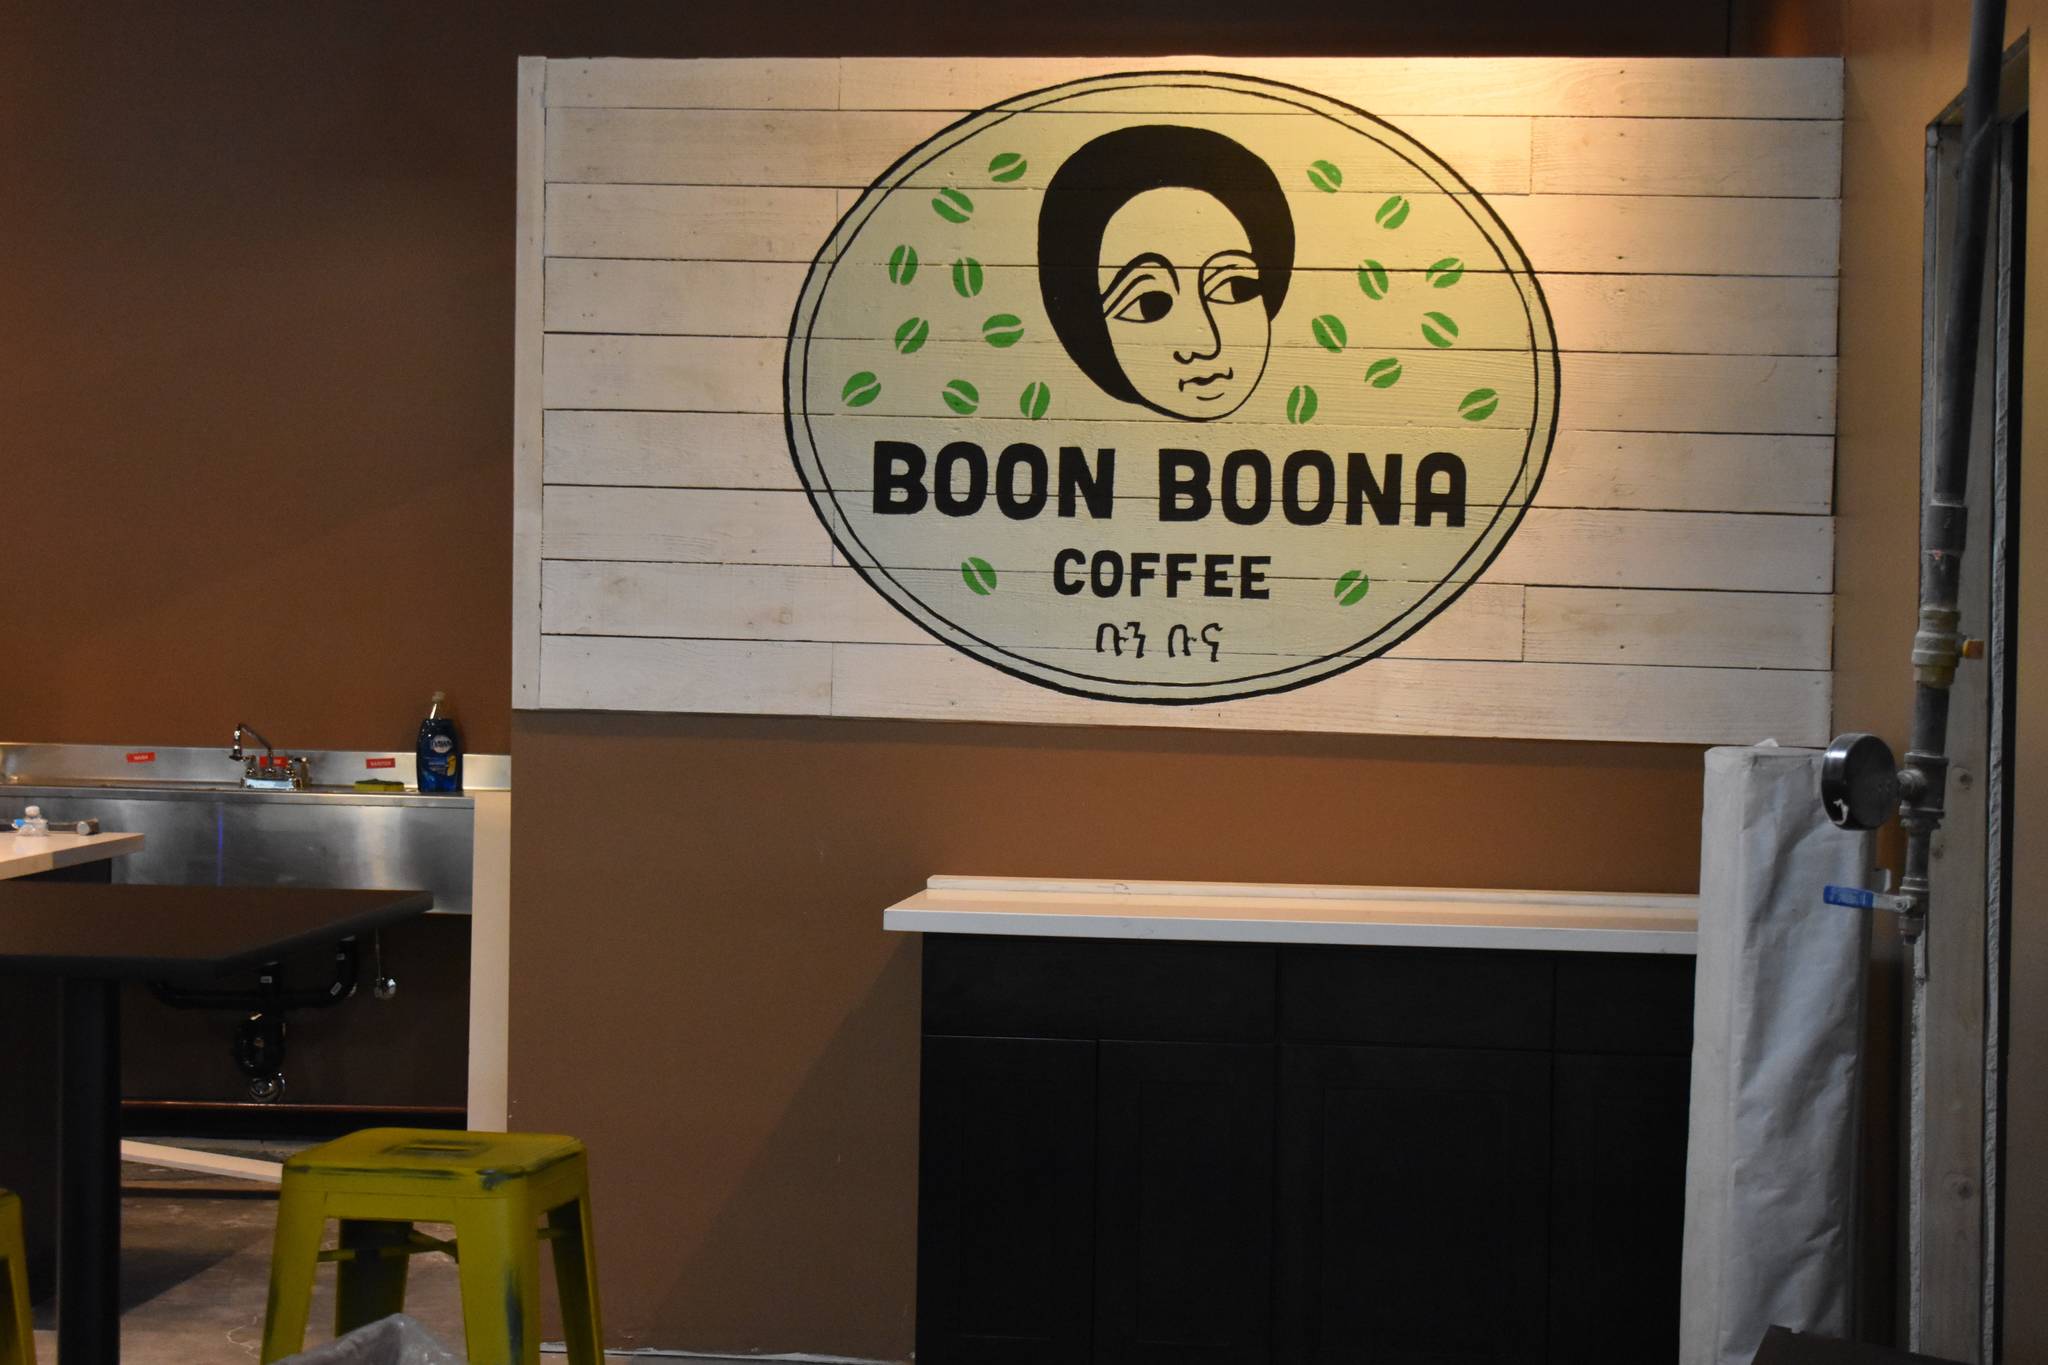 Coffee shop sets opening date